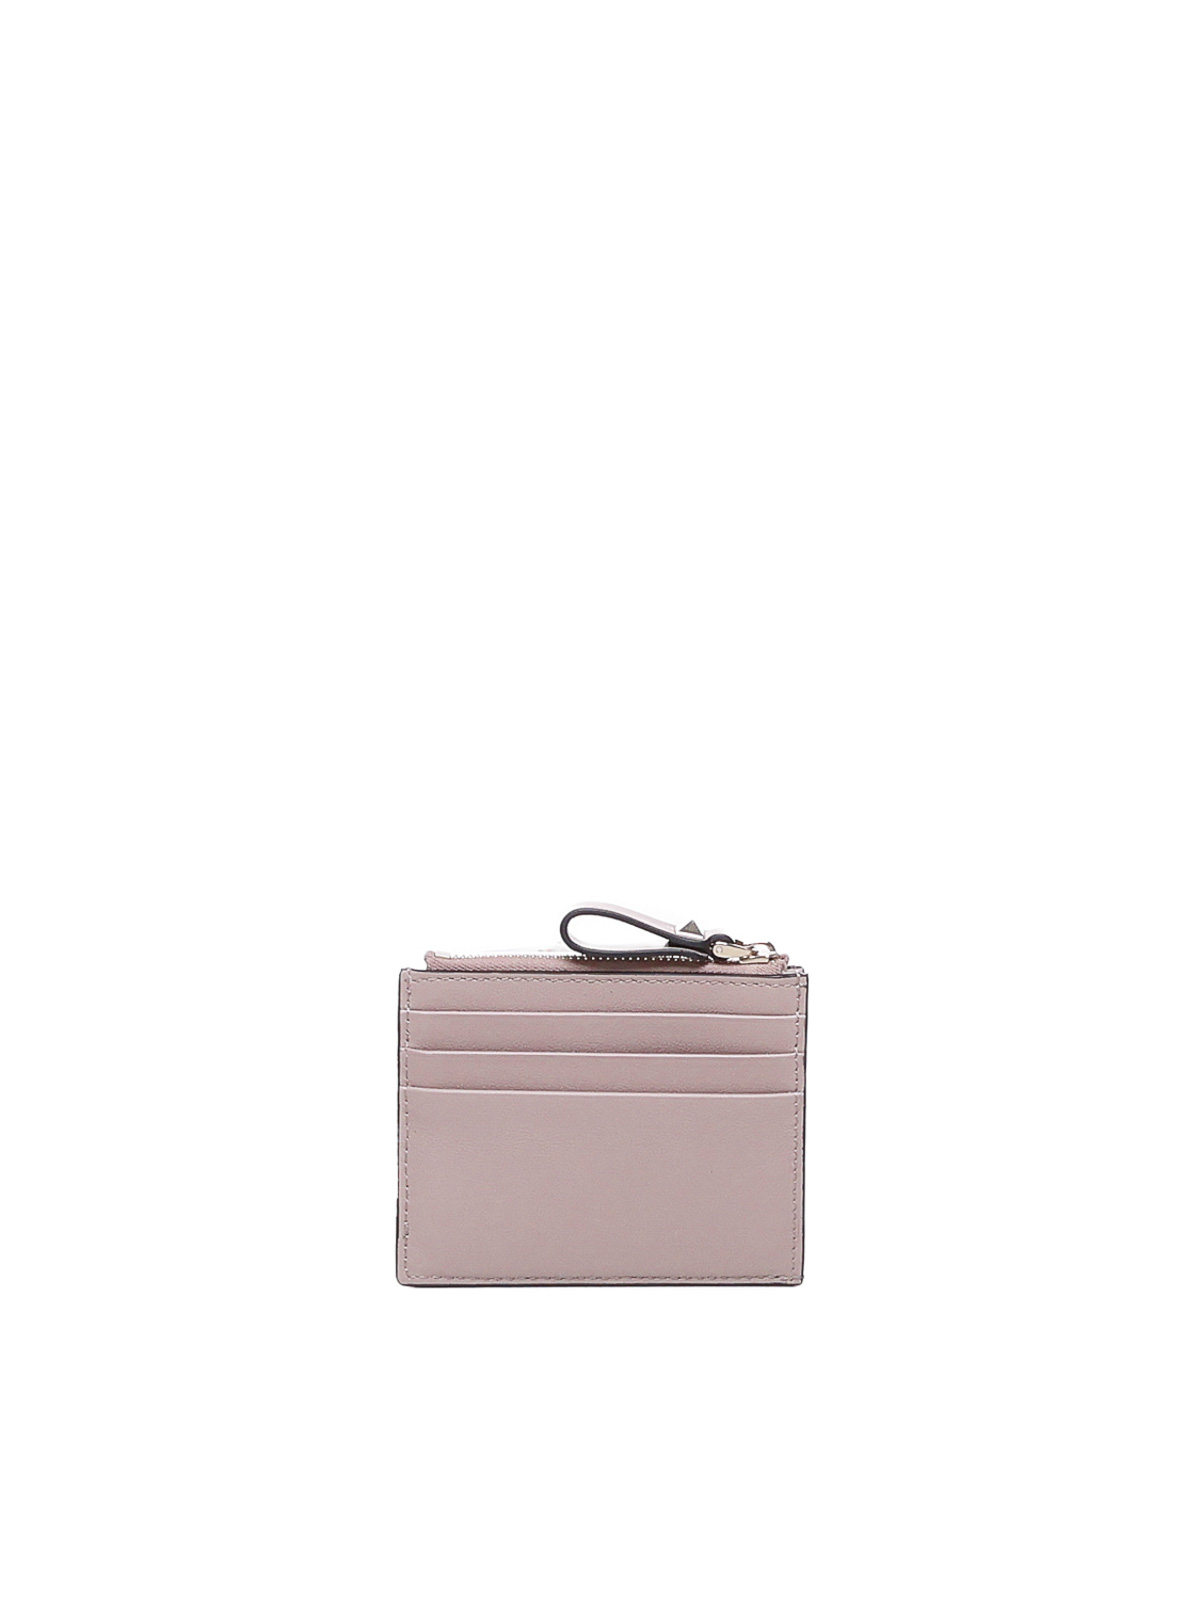 Shop Valentino Bolso Clutch In Color Carne Y Neutral